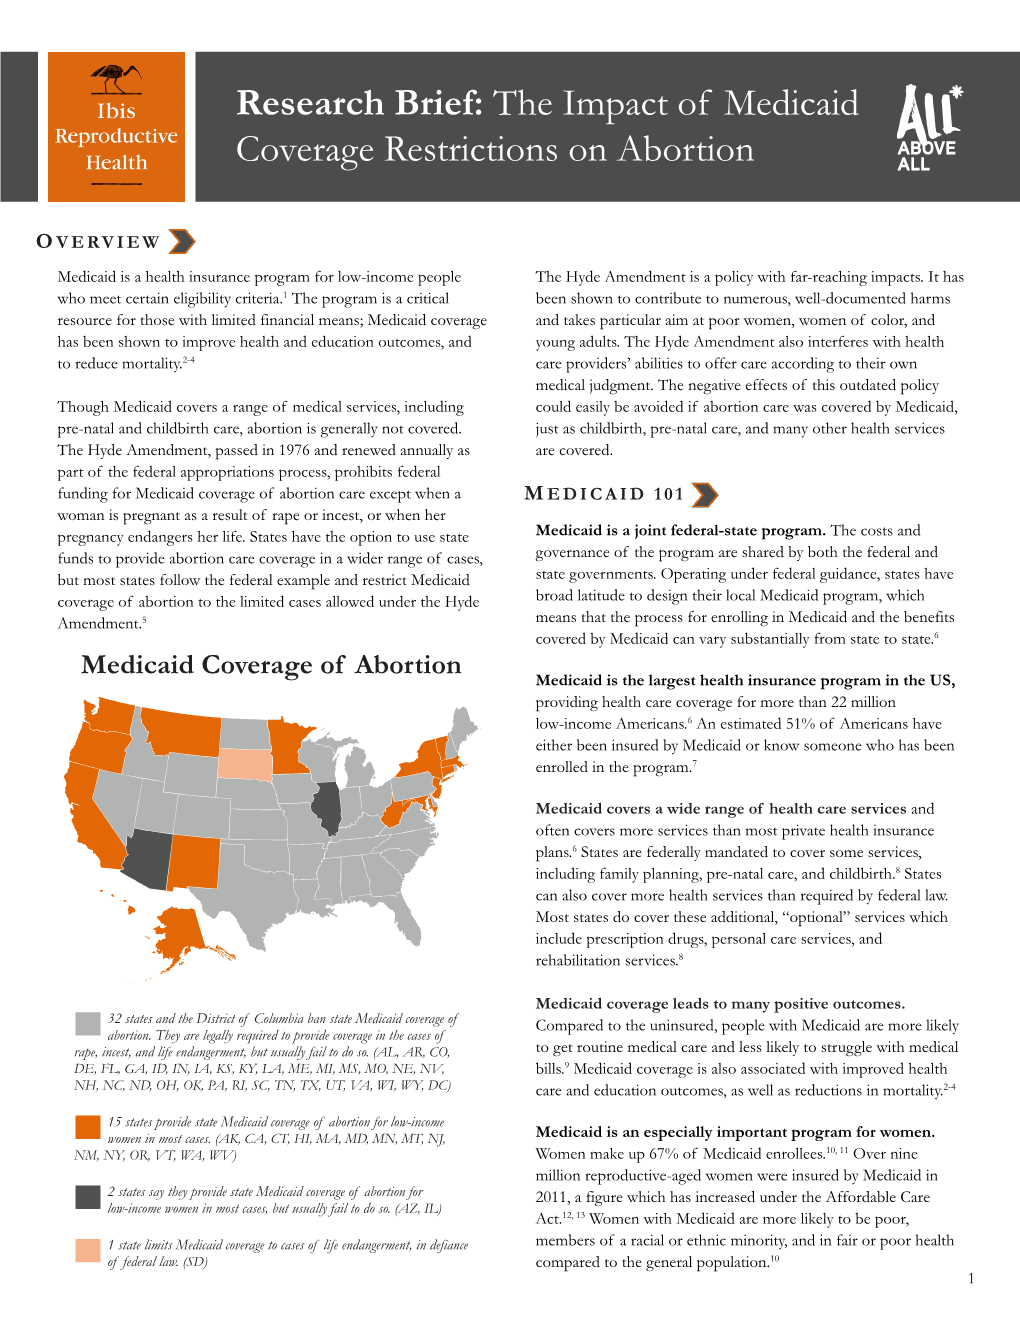 The Impact of Medicaid Coverage Restrictions on Abortion